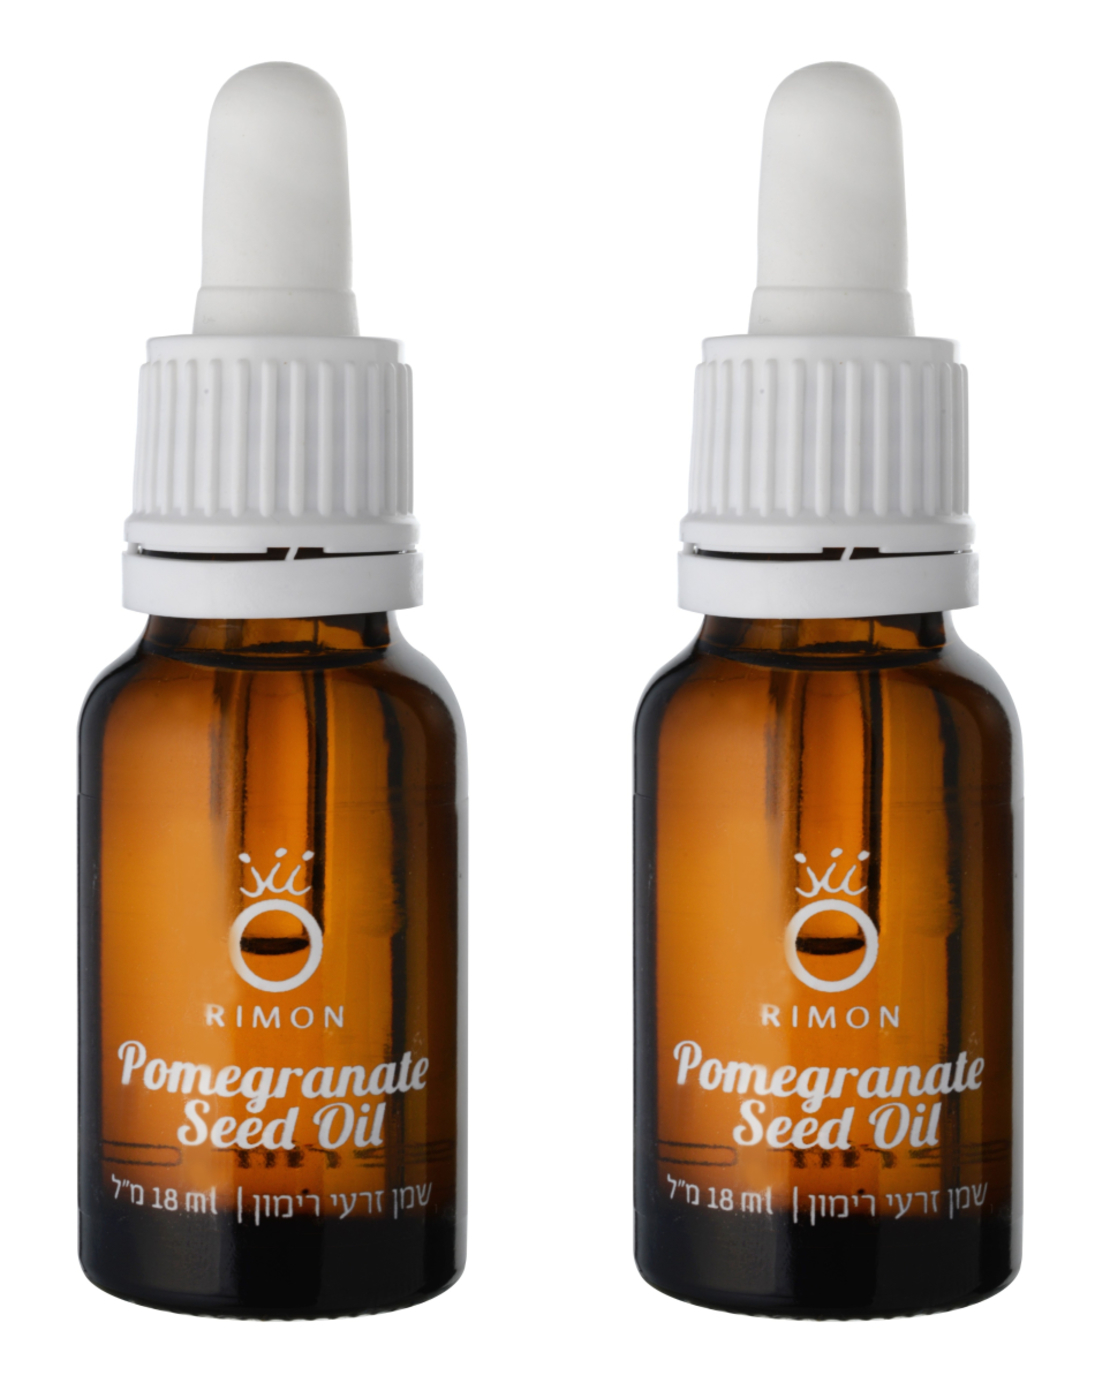  2 POMEGRANATE SEED OIL